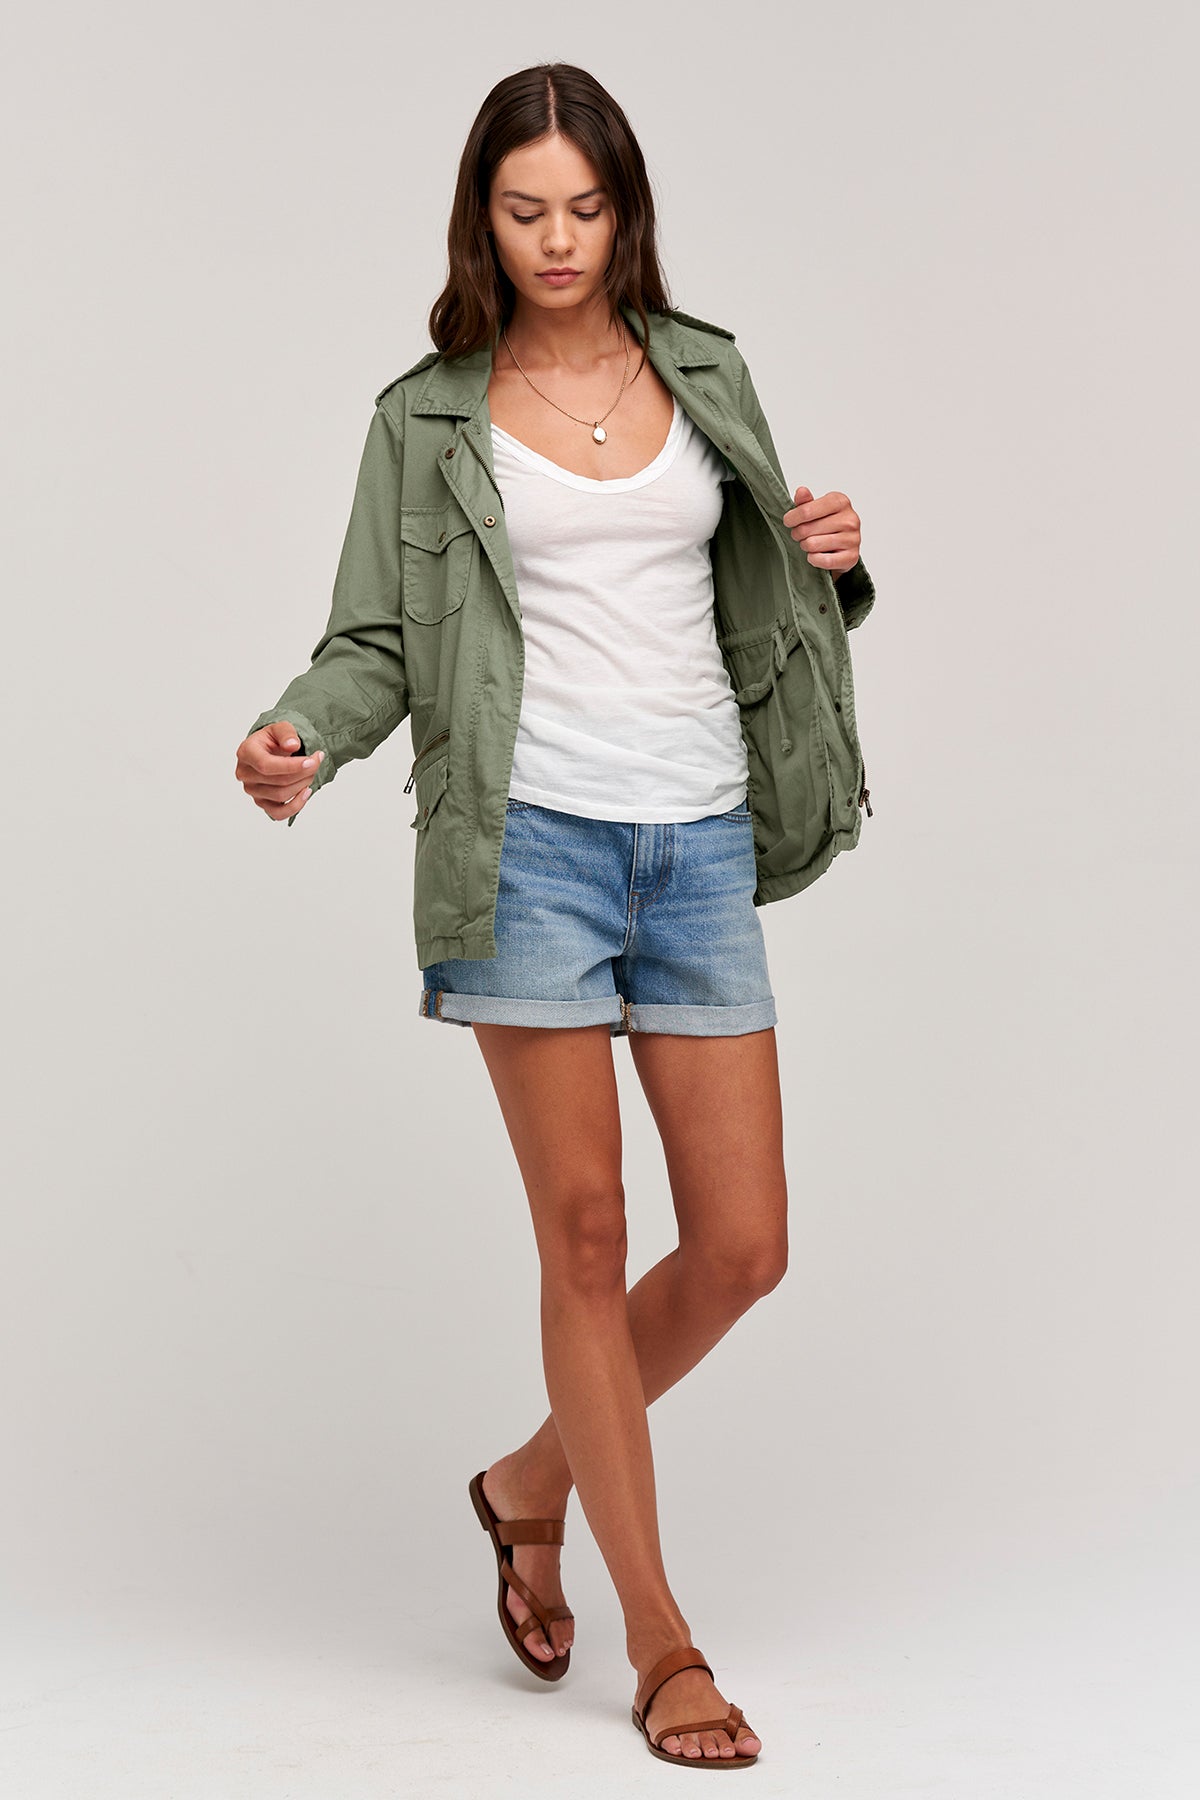   A woman wearing a RUBY LIGHT-WEIGHT ARMY JACKET by Velvet by Graham & Spencer and shorts. 